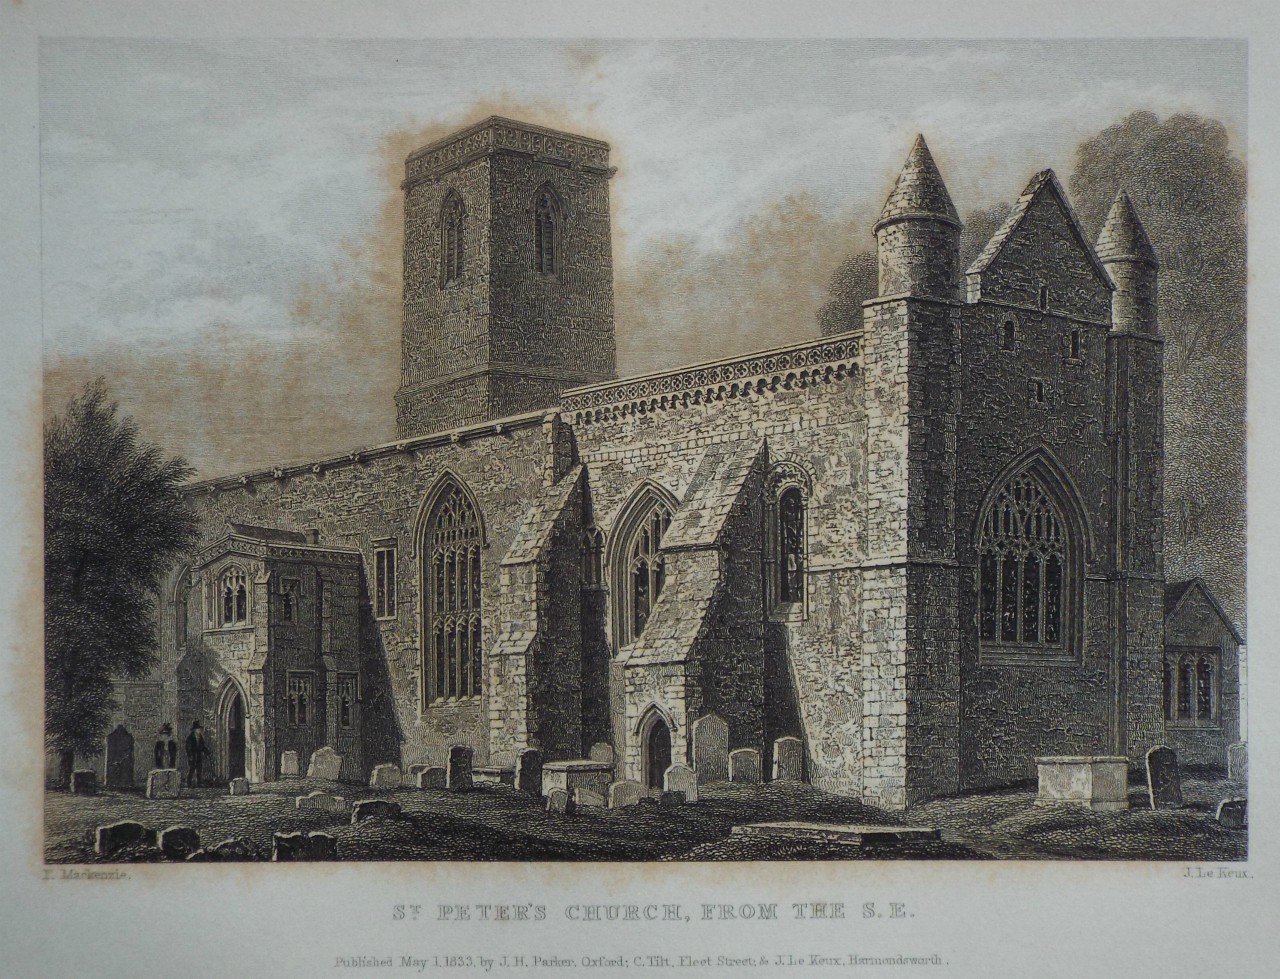 Print - St. Peter's Church, from the S.E. - Le